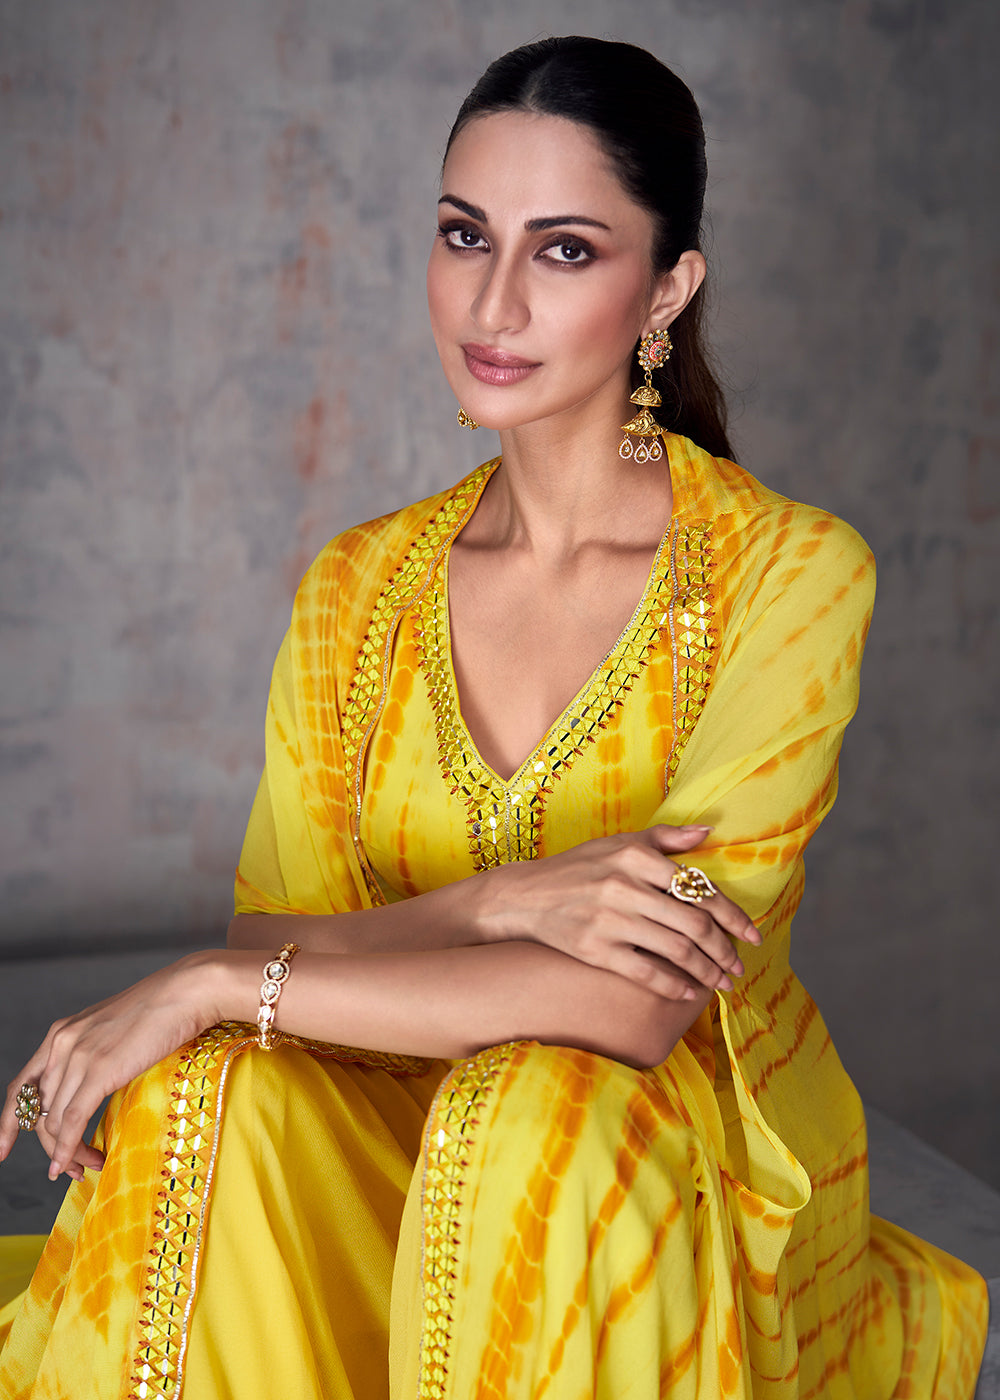 Buy Now Pretty Yellow Indo Western Style Party Wear Palazzo Suit Online in USA, UK, Canada, Germany, Australia & Worldwide at Empress Clothing. 